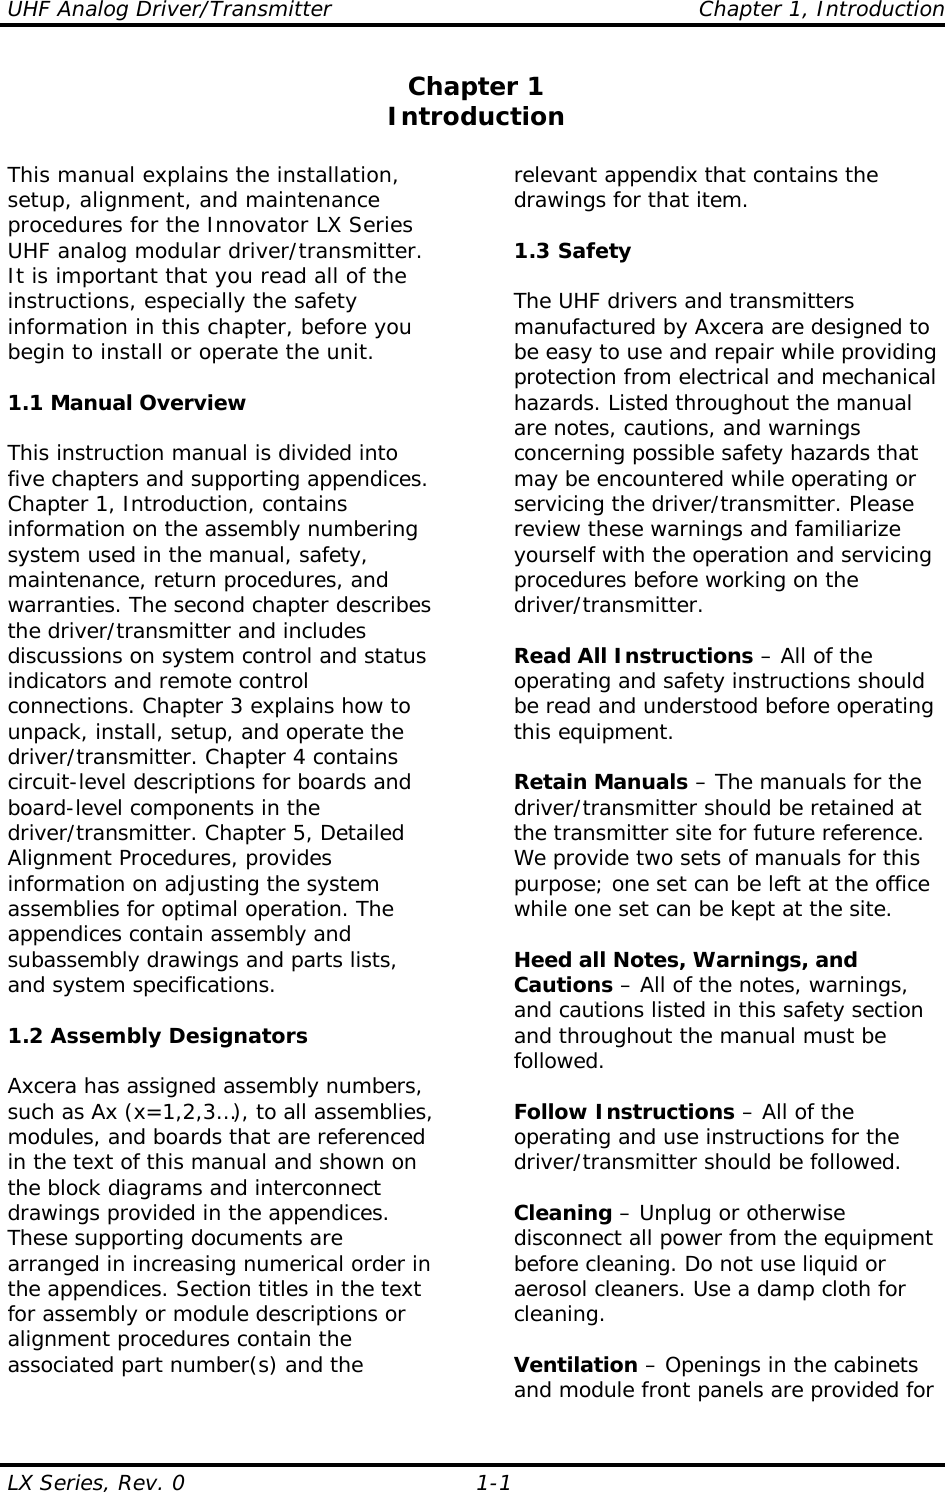 UHF Analog Driver/Transmitter    Chapter 1, Introduction LX Series, Rev. 0    1-1 Chapter 1 Introduction  This manual explains the installation, setup, alignment, and maintenance procedures for the Innovator LX Series UHF analog modular driver/transmitter.  It is important that you read all of the instructions, especially the safety information in this chapter, before you begin to install or operate the unit.  1.1 Manual Overview  This instruction manual is divided into five chapters and supporting appendices. Chapter 1, Introduction, contains information on the assembly numbering system used in the manual, safety, maintenance, return procedures, and warranties. The second chapter describes the driver/transmitter and includes discussions on system control and status indicators and remote control connections. Chapter 3 explains how to unpack, install, setup, and operate the driver/transmitter. Chapter 4 contains circuit-level descriptions for boards and board-level components in the driver/transmitter. Chapter 5, Detailed Alignment Procedures, provides information on adjusting the system assemblies for optimal operation. The appendices contain assembly and subassembly drawings and parts lists, and system specifications.  1.2 Assembly Designators  Axcera has assigned assembly numbers, such as Ax (x=1,2,3…), to all assemblies, modules, and boards that are referenced in the text of this manual and shown on the block diagrams and interconnect drawings provided in the appendices. These supporting documents are arranged in increasing numerical order in the appendices. Section titles in the text for assembly or module descriptions or alignment procedures contain the associated part number(s) and the relevant appendix that contains the drawings for that item.   1.3 Safety  The UHF drivers and transmitters manufactured by Axcera are designed to be easy to use and repair while providing protection from electrical and mechanical hazards. Listed throughout the manual are notes, cautions, and warnings concerning possible safety hazards that may be encountered while operating or servicing the driver/transmitter. Please review these warnings and familiarize yourself with the operation and servicing procedures before working on the driver/transmitter.  Read All Instructions – All of the operating and safety instructions should be read and understood before operating this equipment.  Retain Manuals – The manuals for the driver/transmitter should be retained at the transmitter site for future reference. We provide two sets of manuals for this purpose; one set can be left at the office while one set can be kept at the site.  Heed all Notes, Warnings, and Cautions – All of the notes, warnings, and cautions listed in this safety section and throughout the manual must be followed.  Follow Instructions – All of the operating and use instructions for the driver/transmitter should be followed.  Cleaning – Unplug or otherwise disconnect all power from the equipment before cleaning. Do not use liquid or aerosol cleaners. Use a damp cloth for cleaning.  Ventilation – Openings in the cabinets and module front panels are provided for 